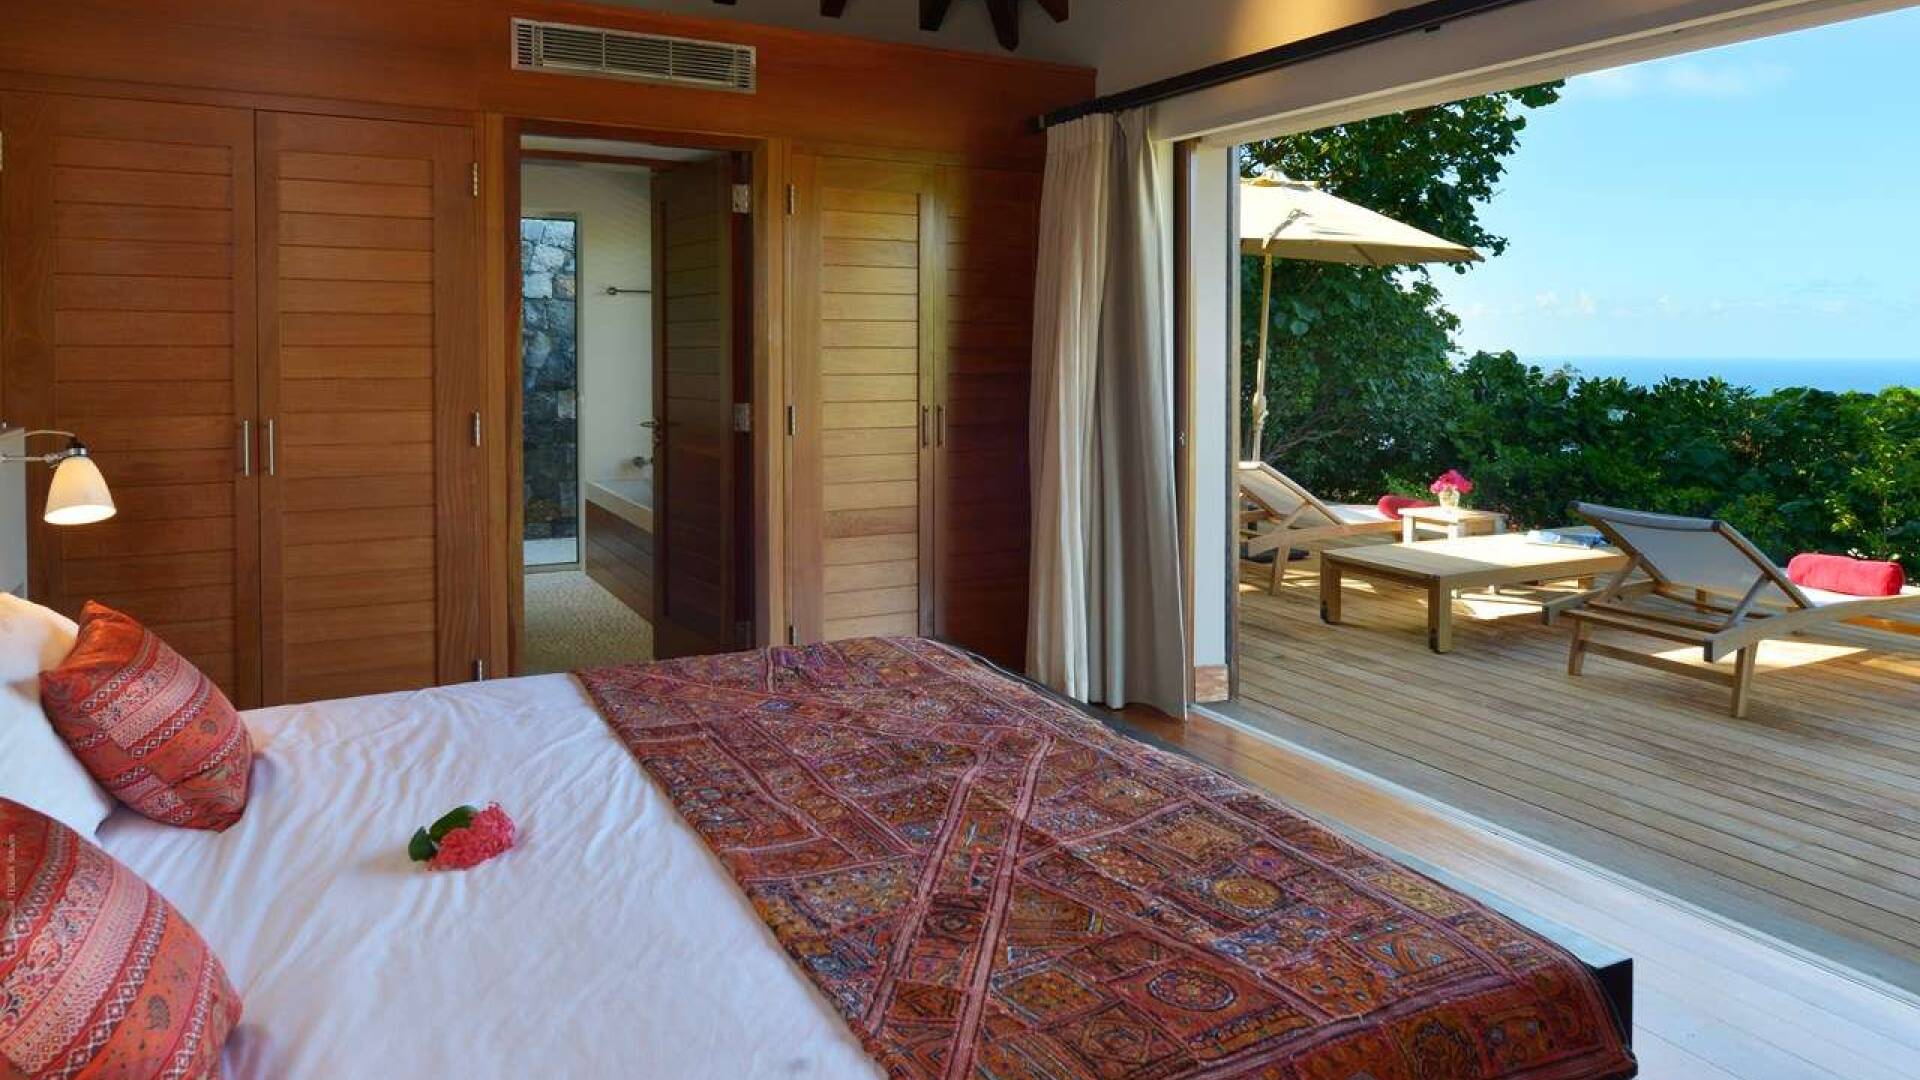 Bedroom at WV MJP, Flamands, St. Barthelemy